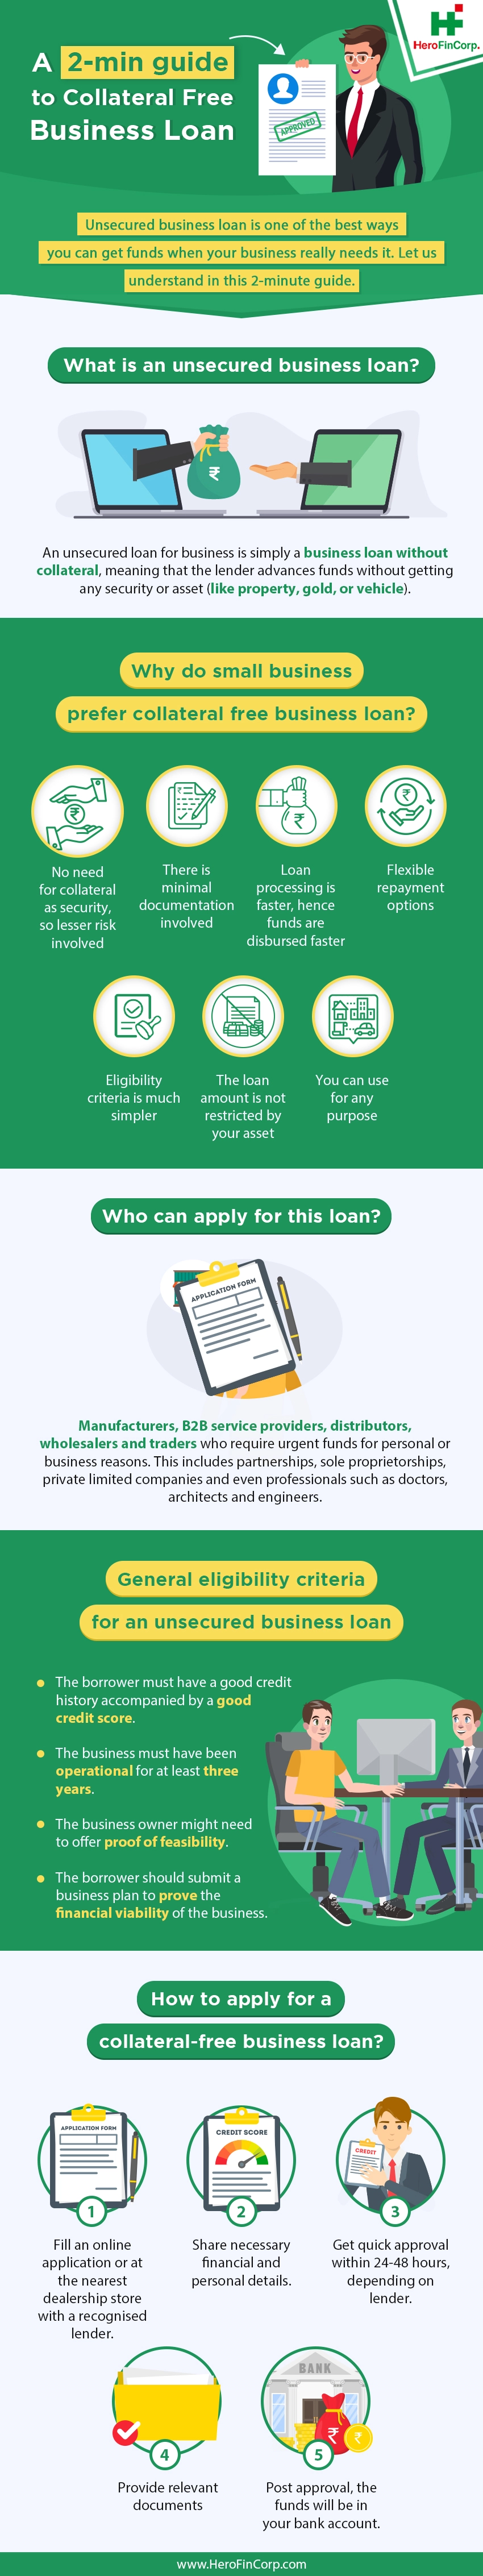 Hero FinCorp - Get Instant Personal Loan, Business Loan, Two